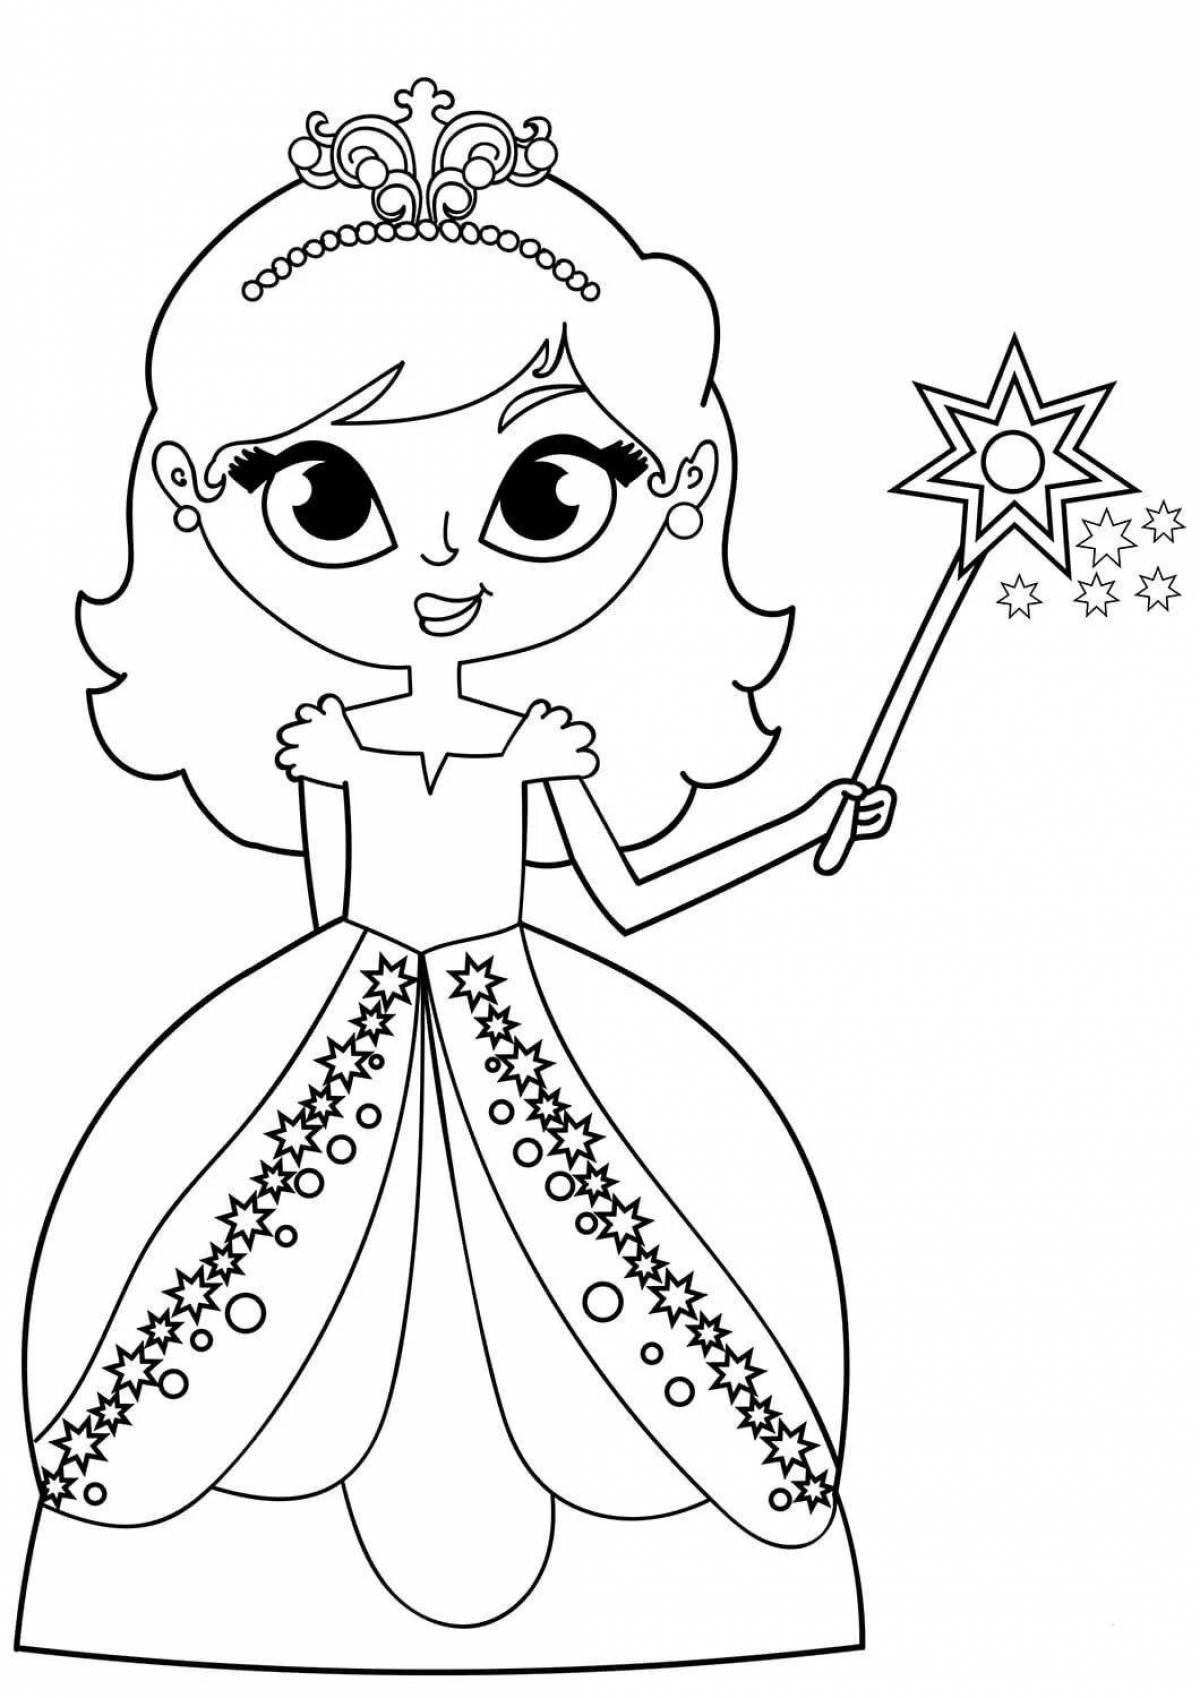 Shining coloring book for children 3-4 years old for girls princess